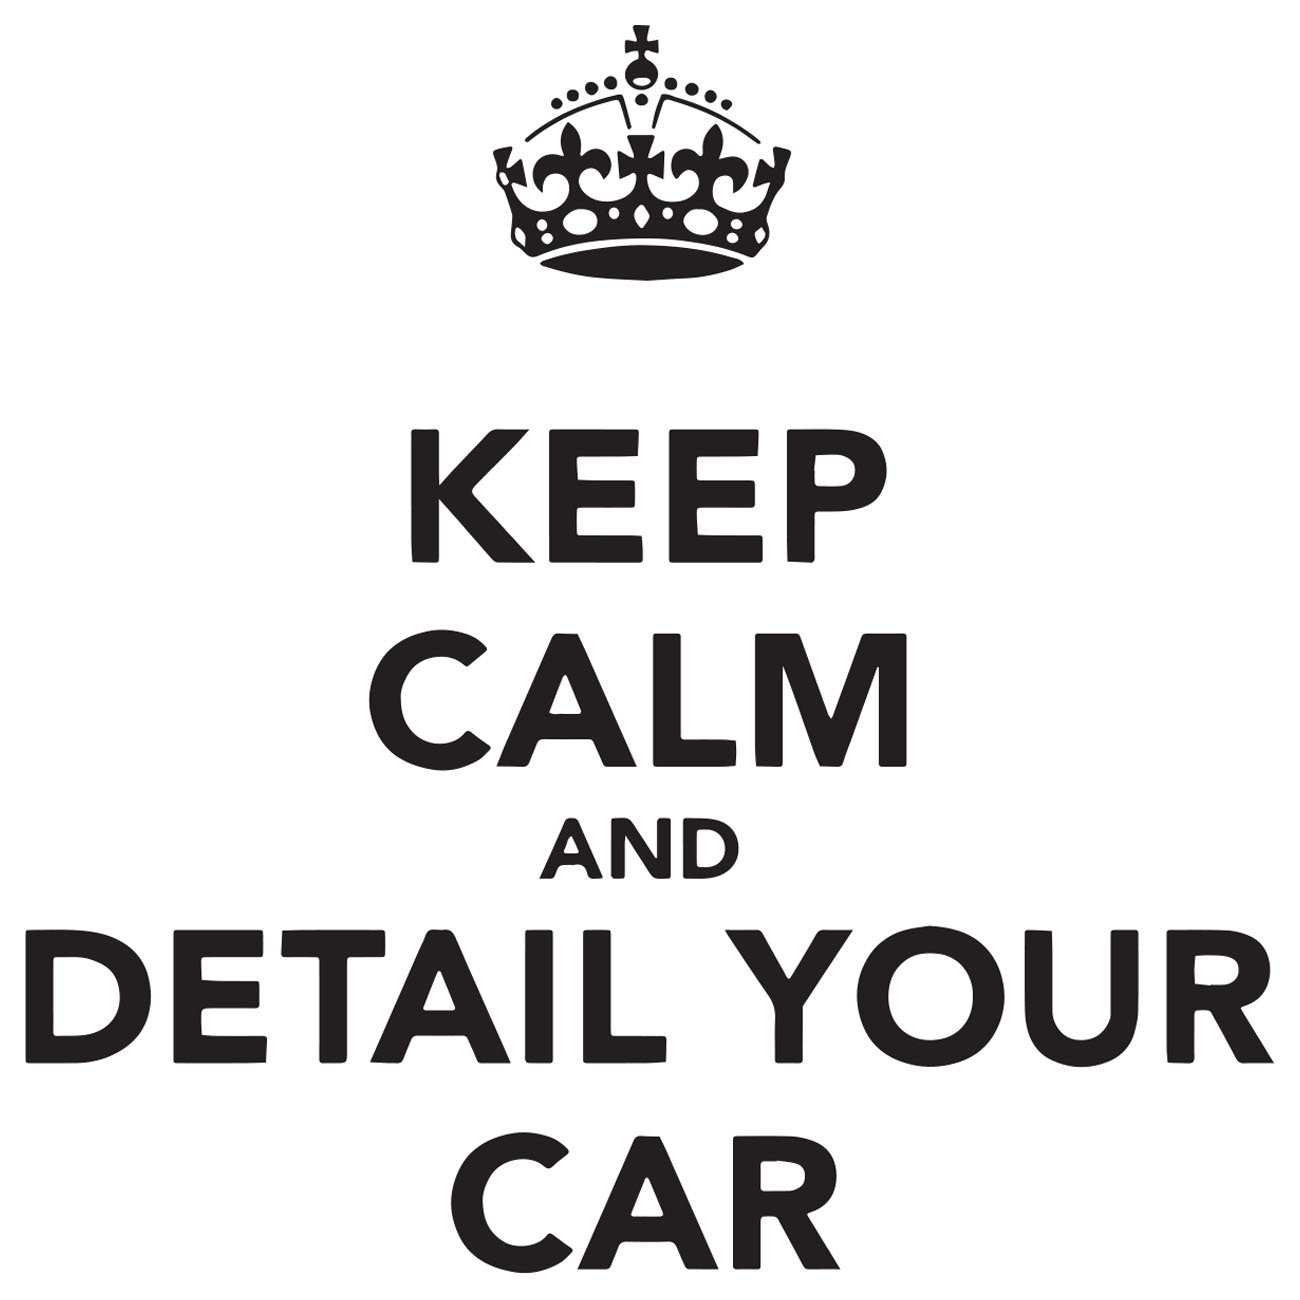 Keep calm and detail your car